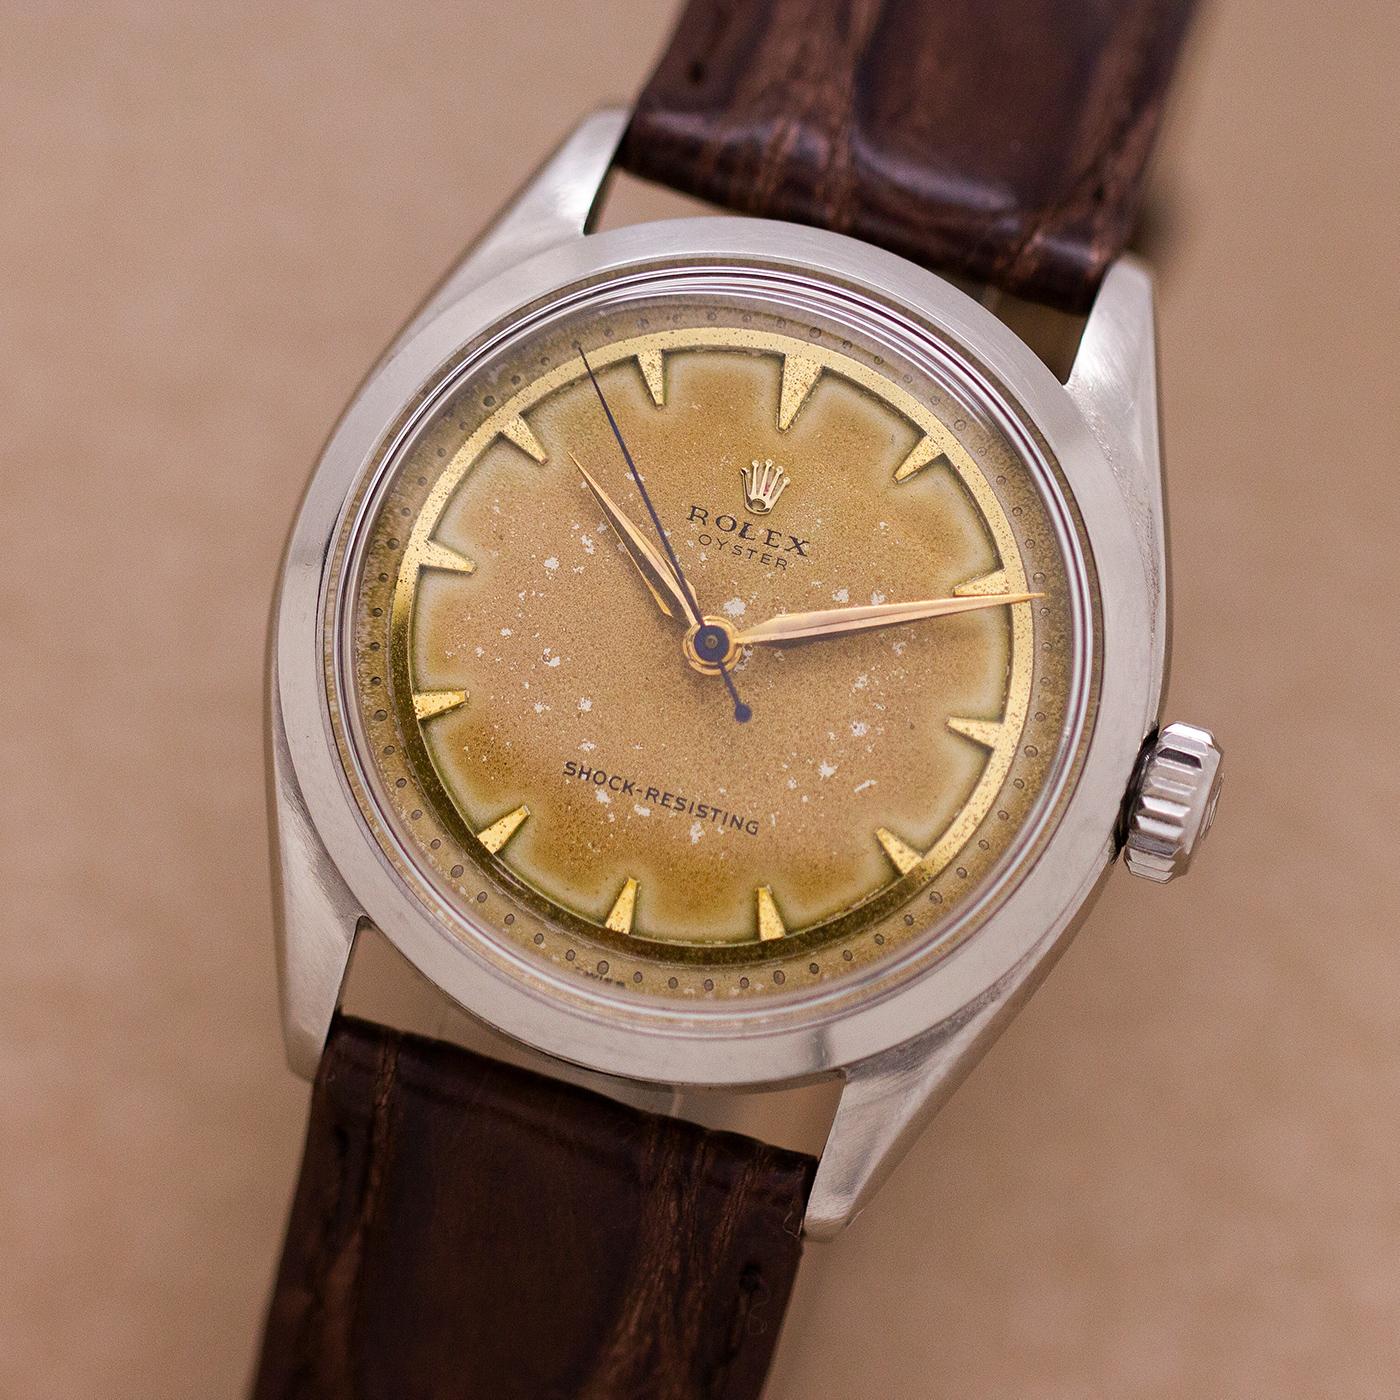 Rolex Stainless Steel Oyster Manual Wind Model, circa 1955 In Excellent Condition For Sale In West Hollywood, CA